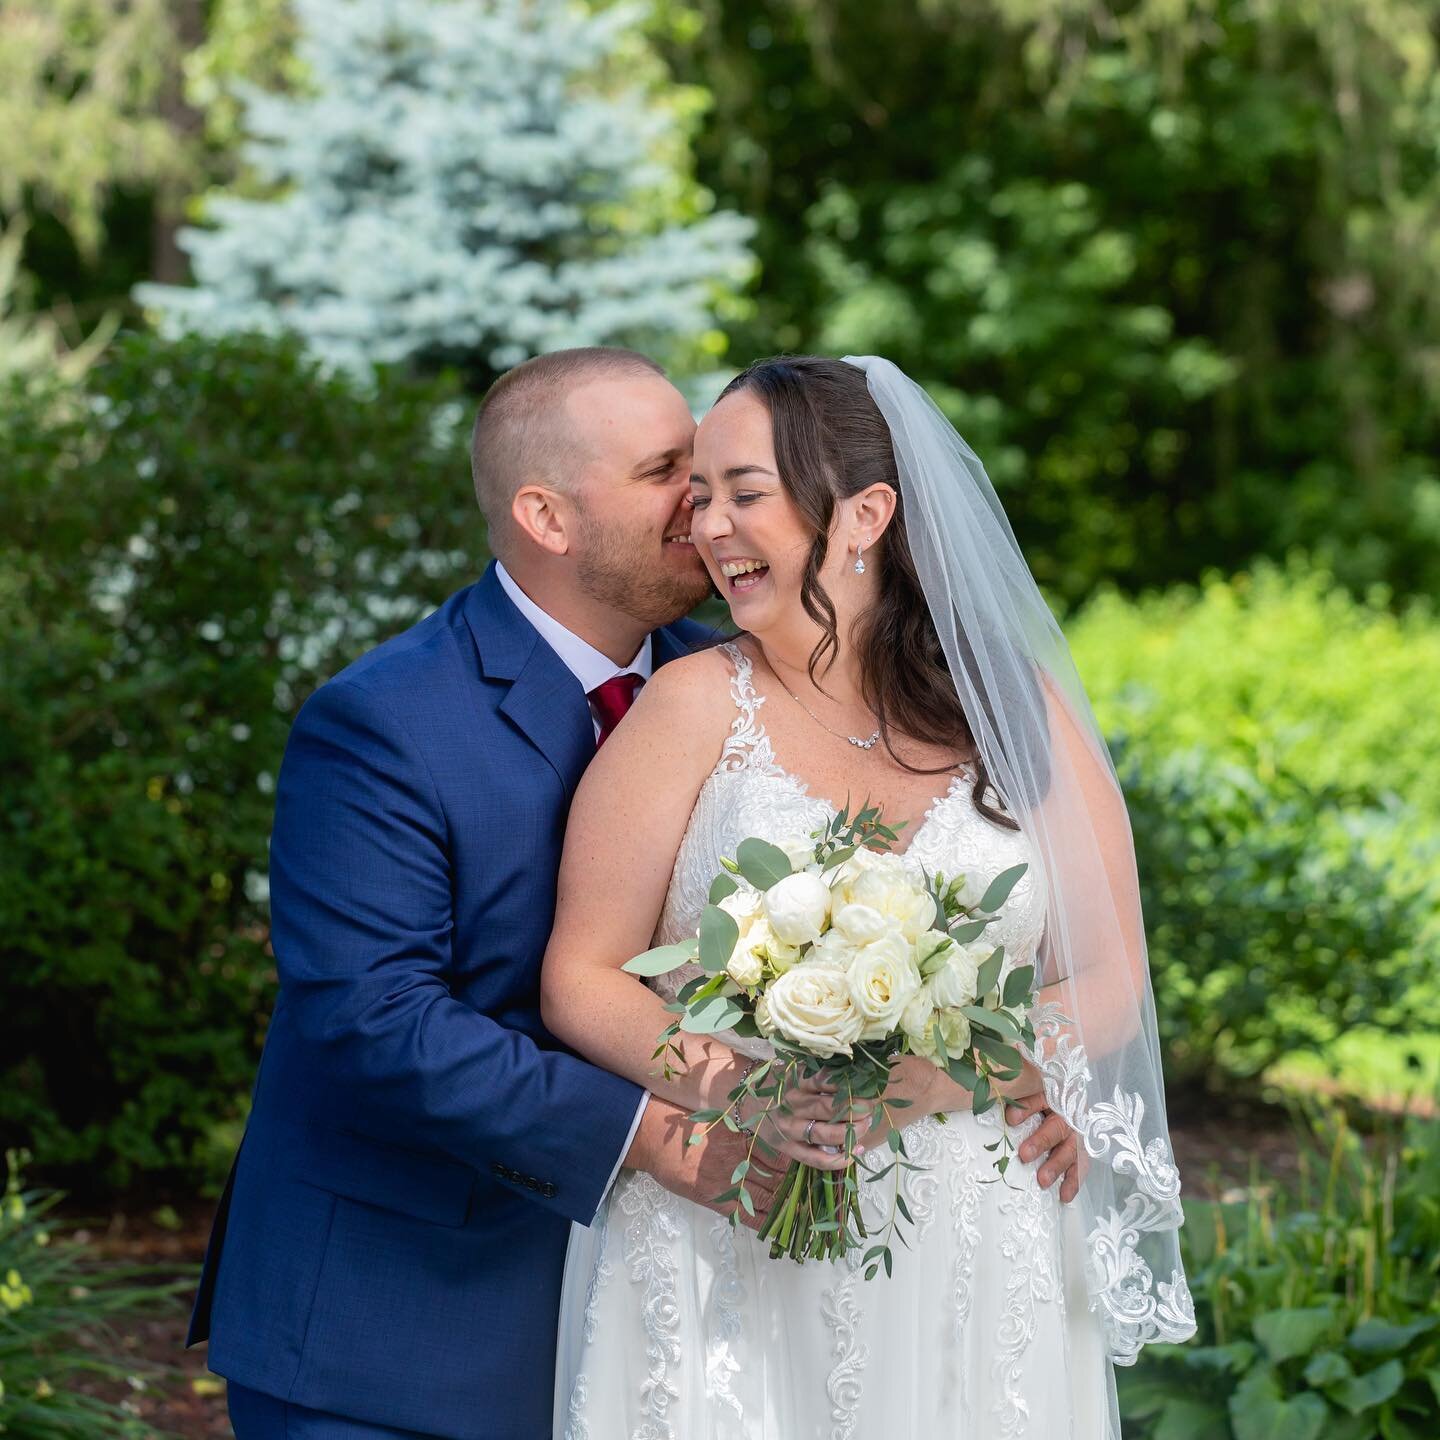 Being able to laugh with one another is easily one of the best things in life. ❤️ 

#wedding #ido #laughter #brideandgroom #weddinggarden #dibblesinn #dibblesinnorchardandestate #weddingphotography #cnywedding